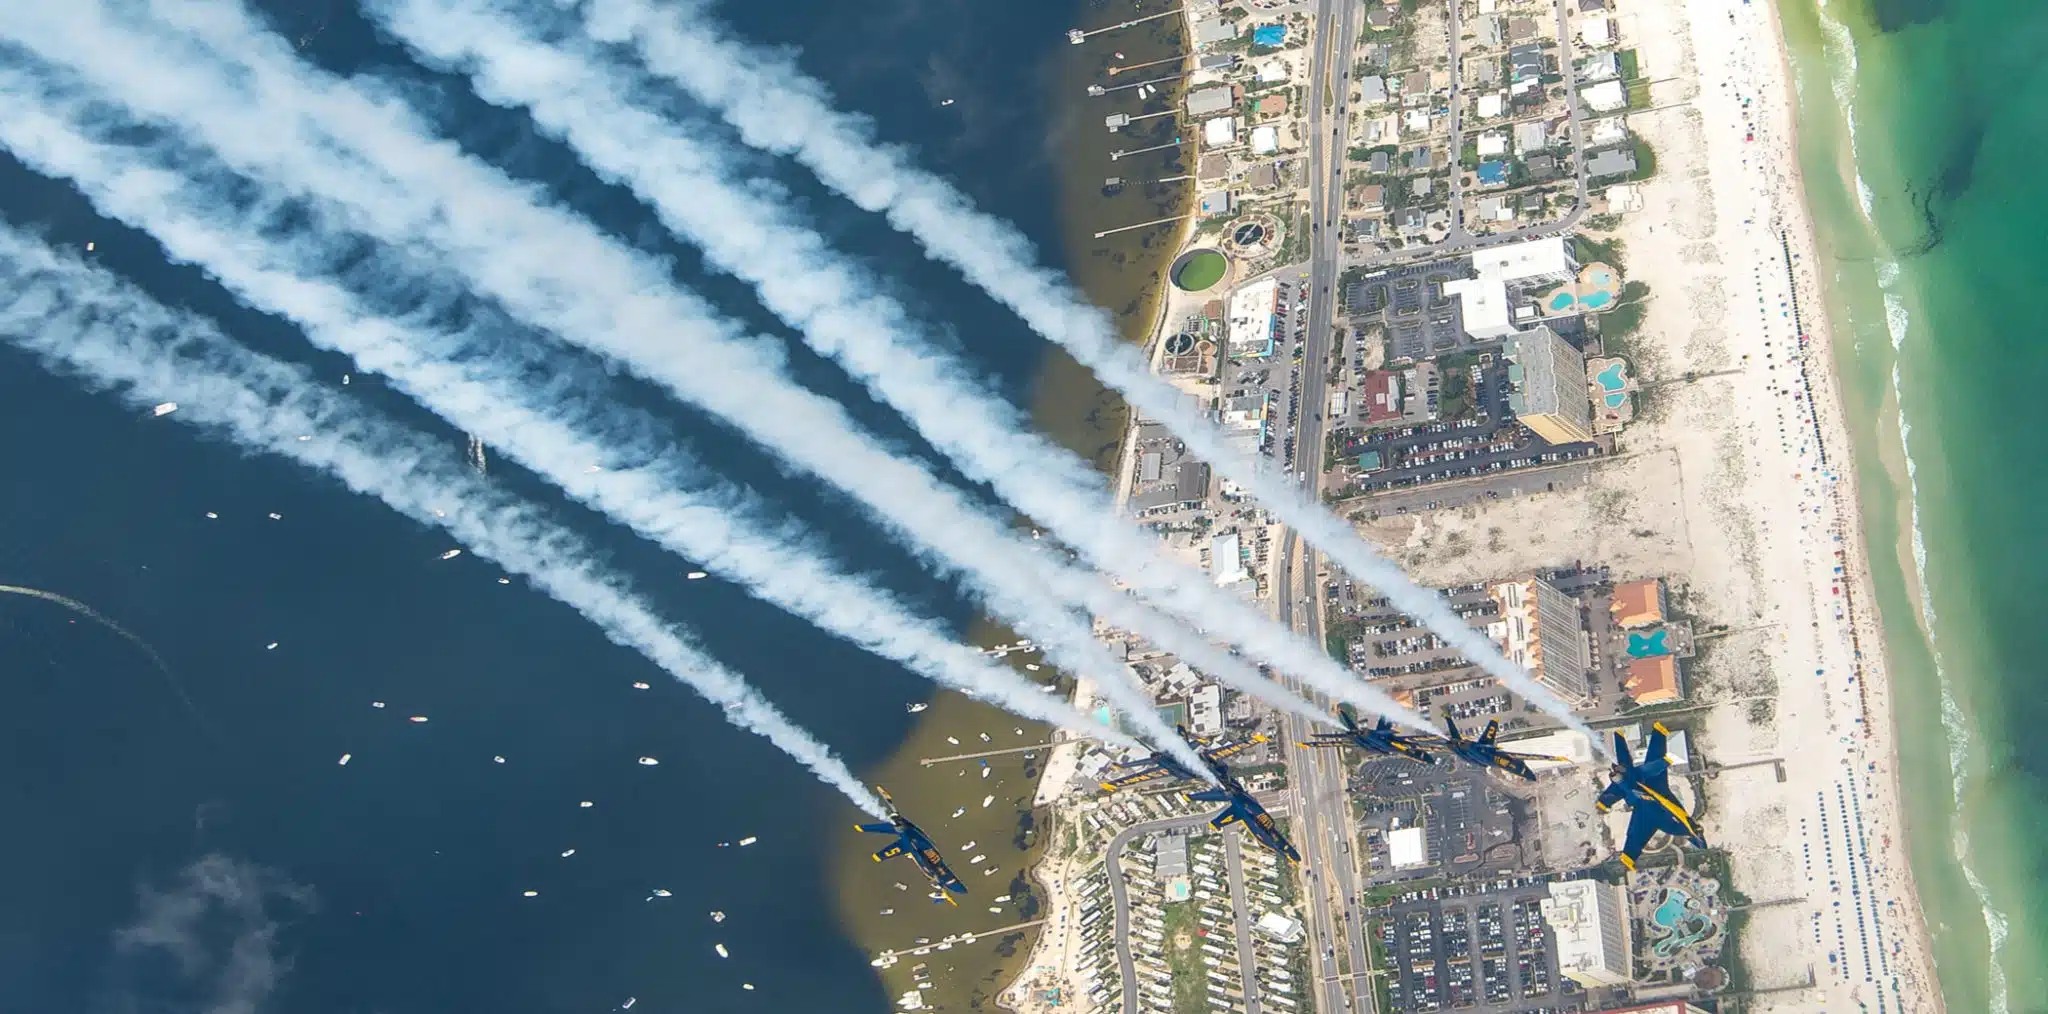 Blue Angels Flying over Pensacola Beach